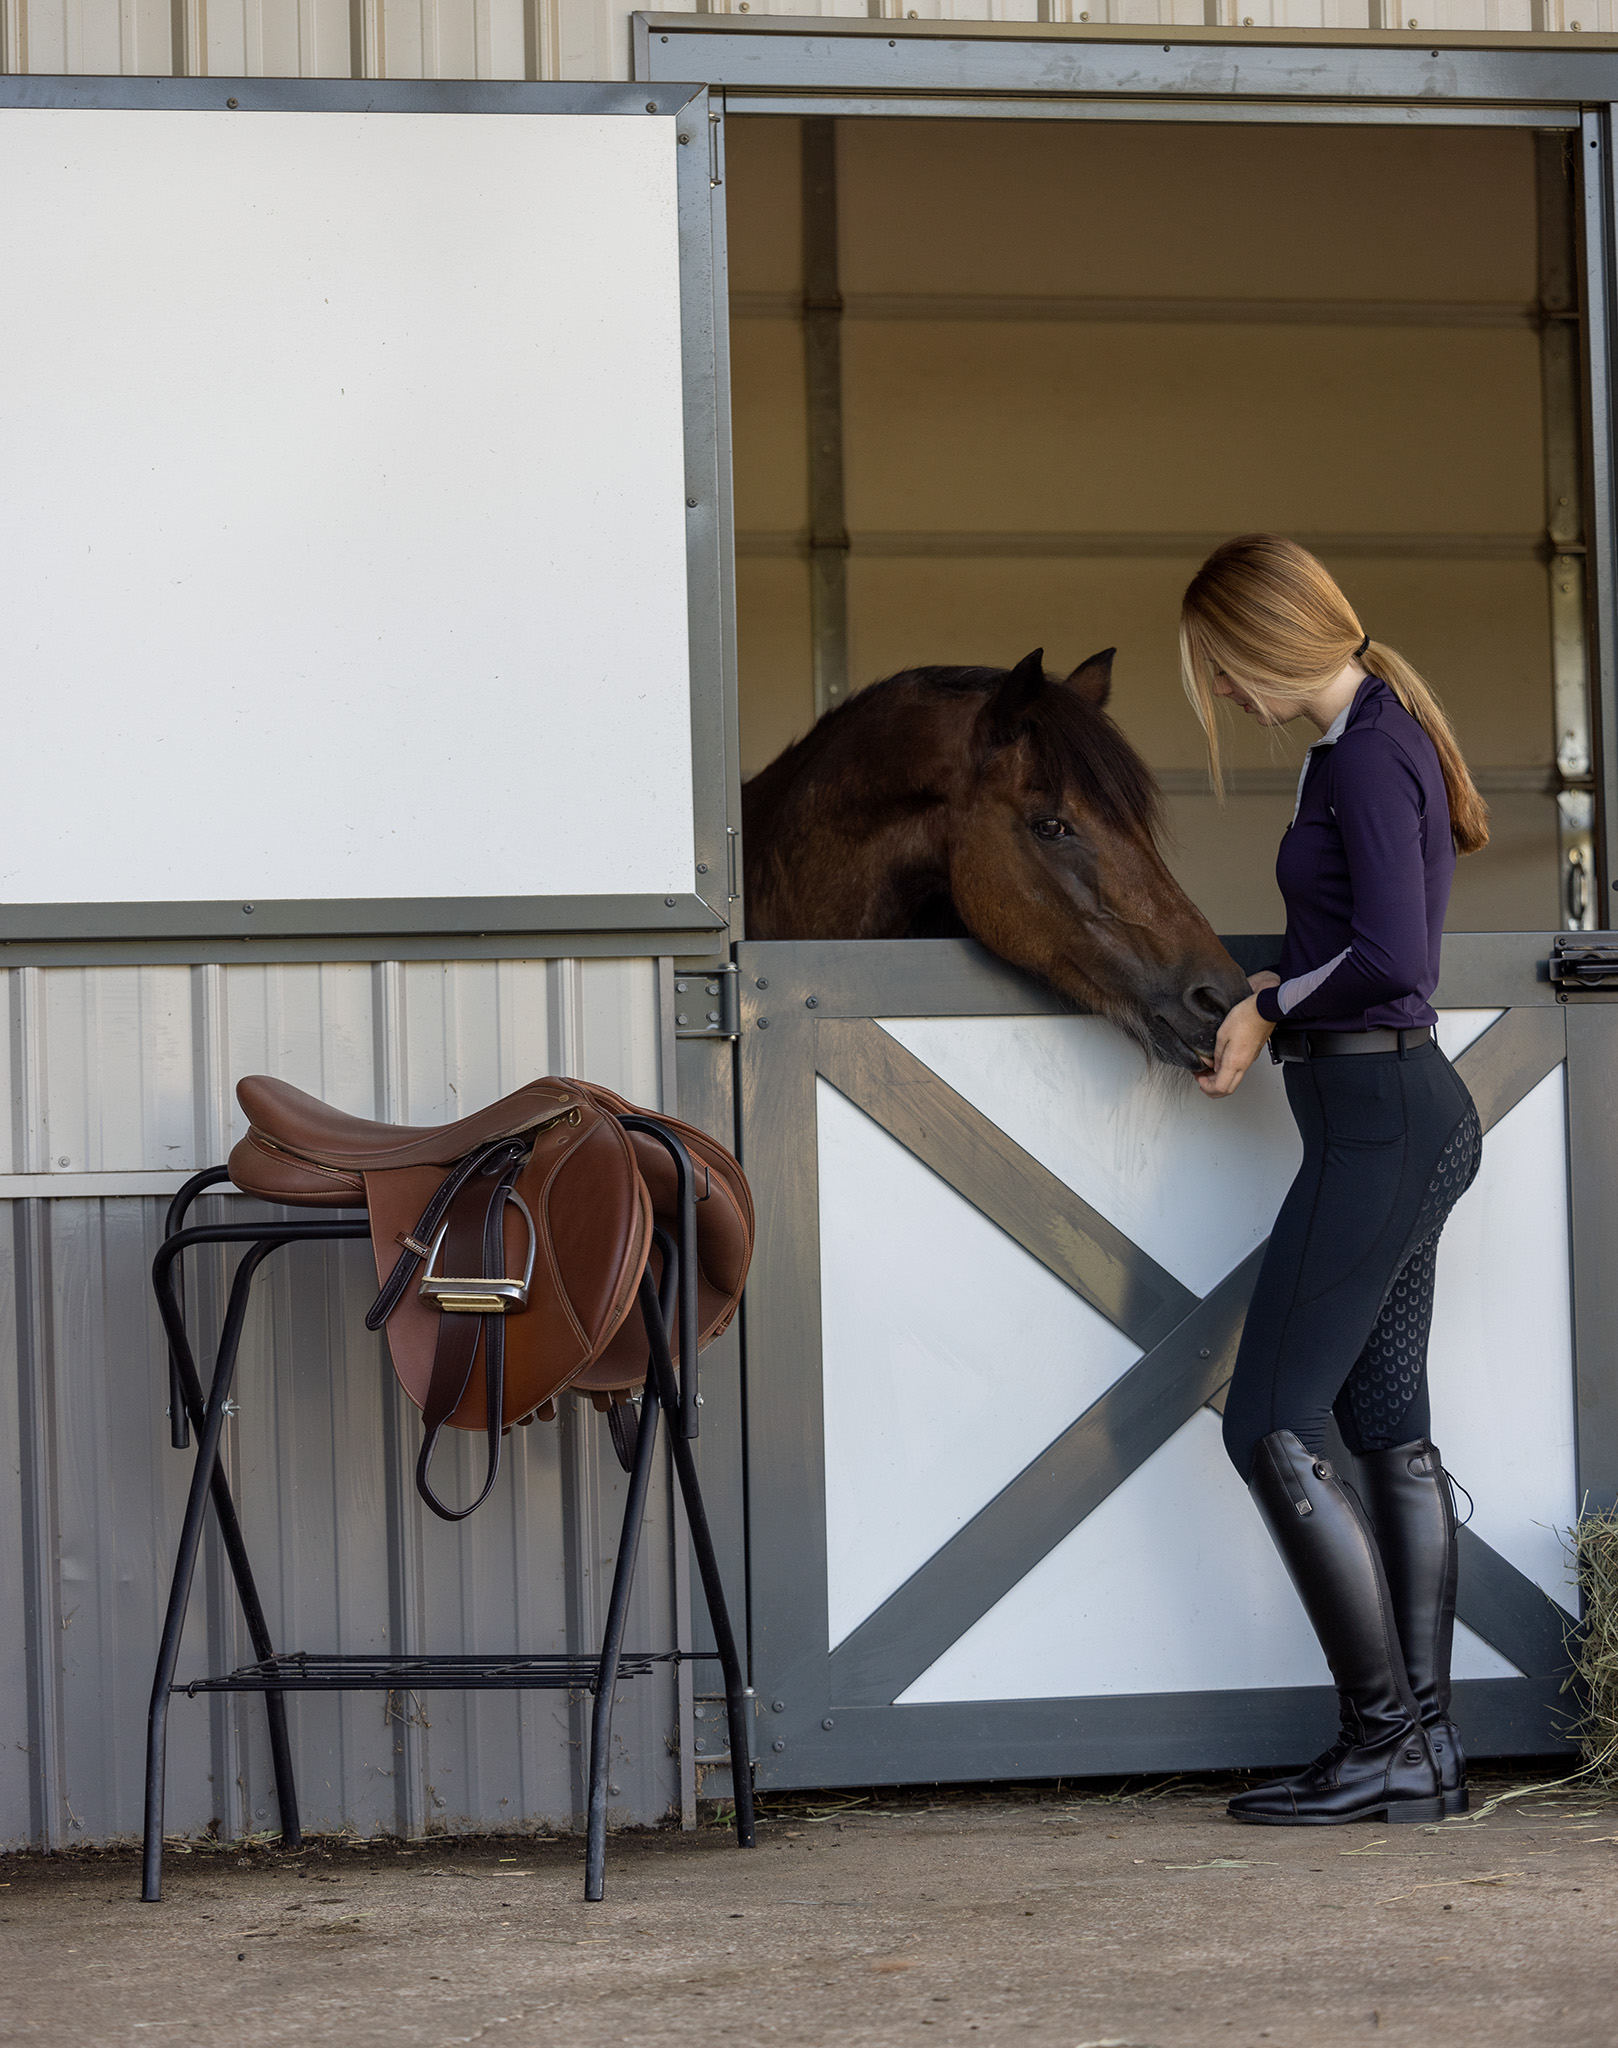 Commercial and branding image of Equestrian girl feeding horse a treat in stable with english saddle and total saddle fit stirrup leathers sitting nearby.